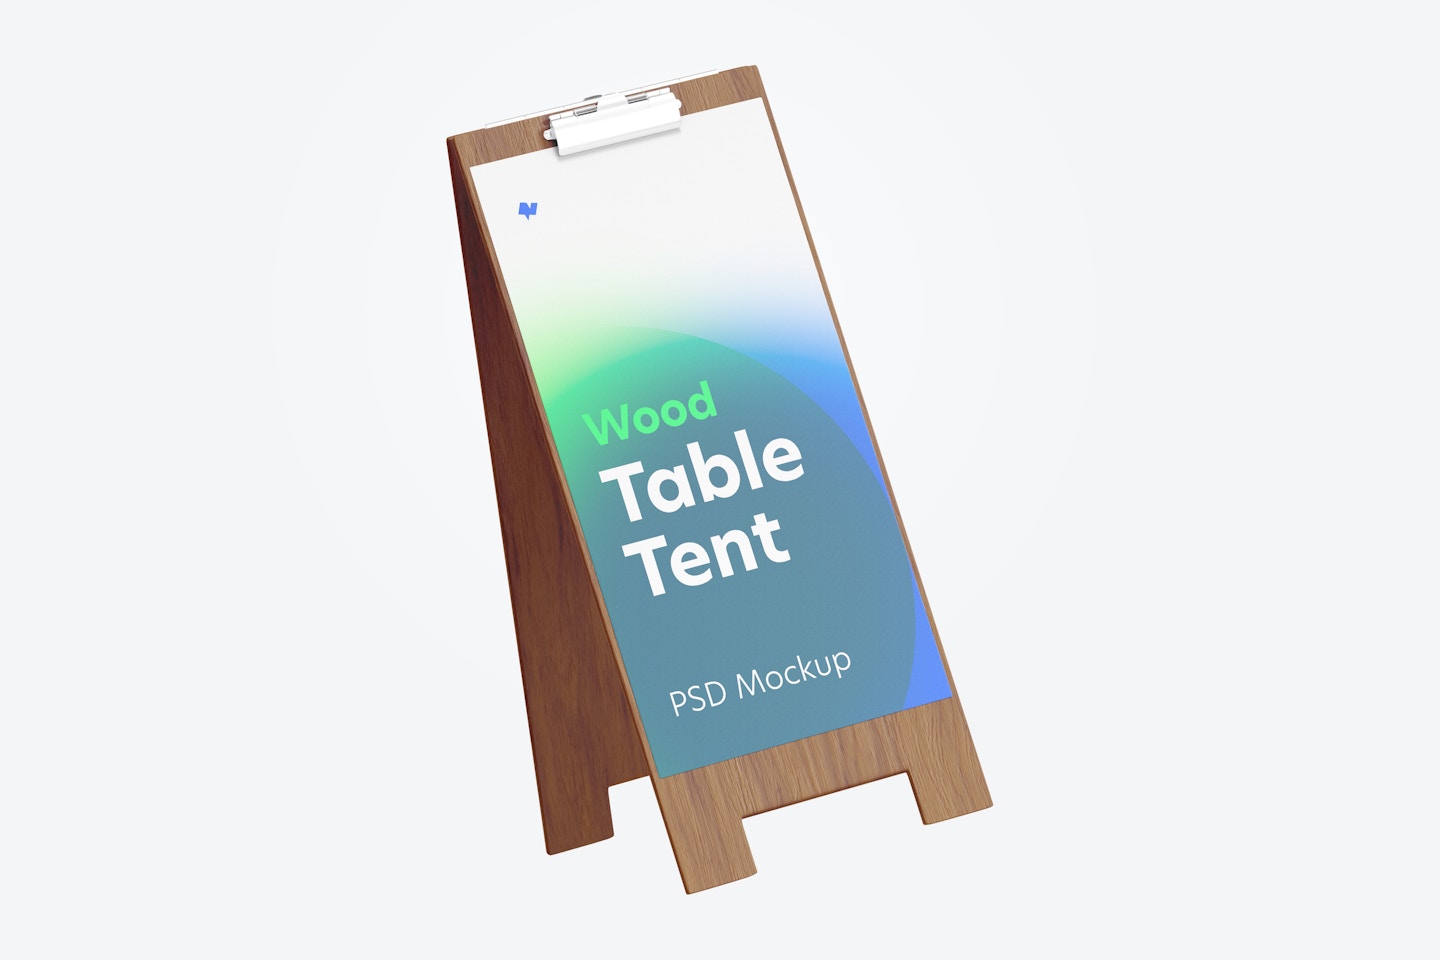 Wood Table Tent with Clip Mockup, Floating